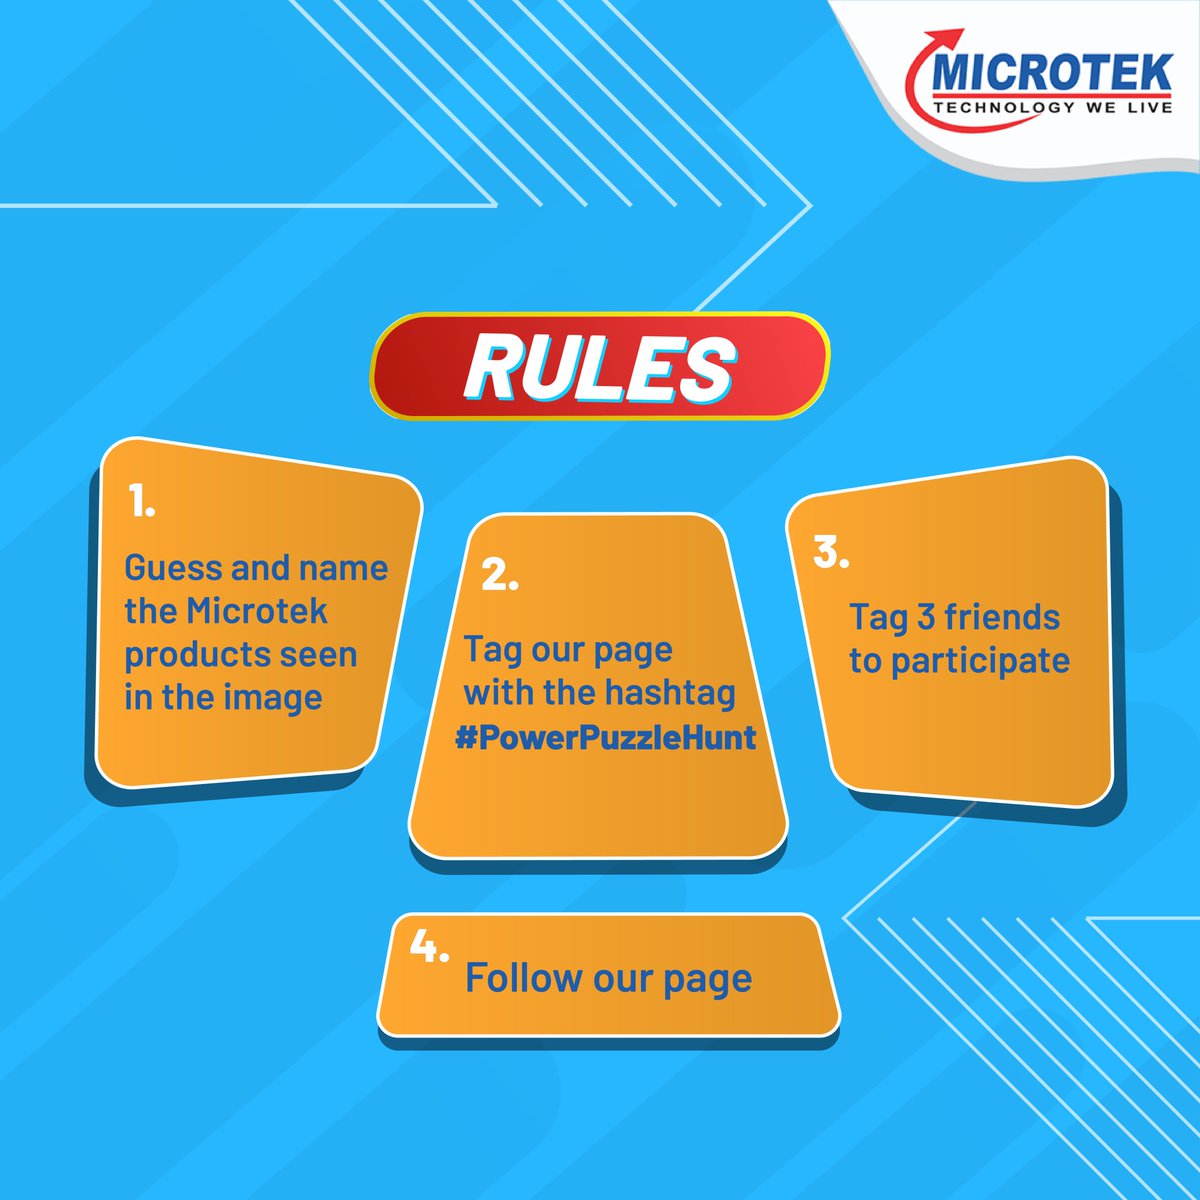 Comment your answers as fast you can and get a chance to win exciting prizes.

#PowerPuzzleHunt